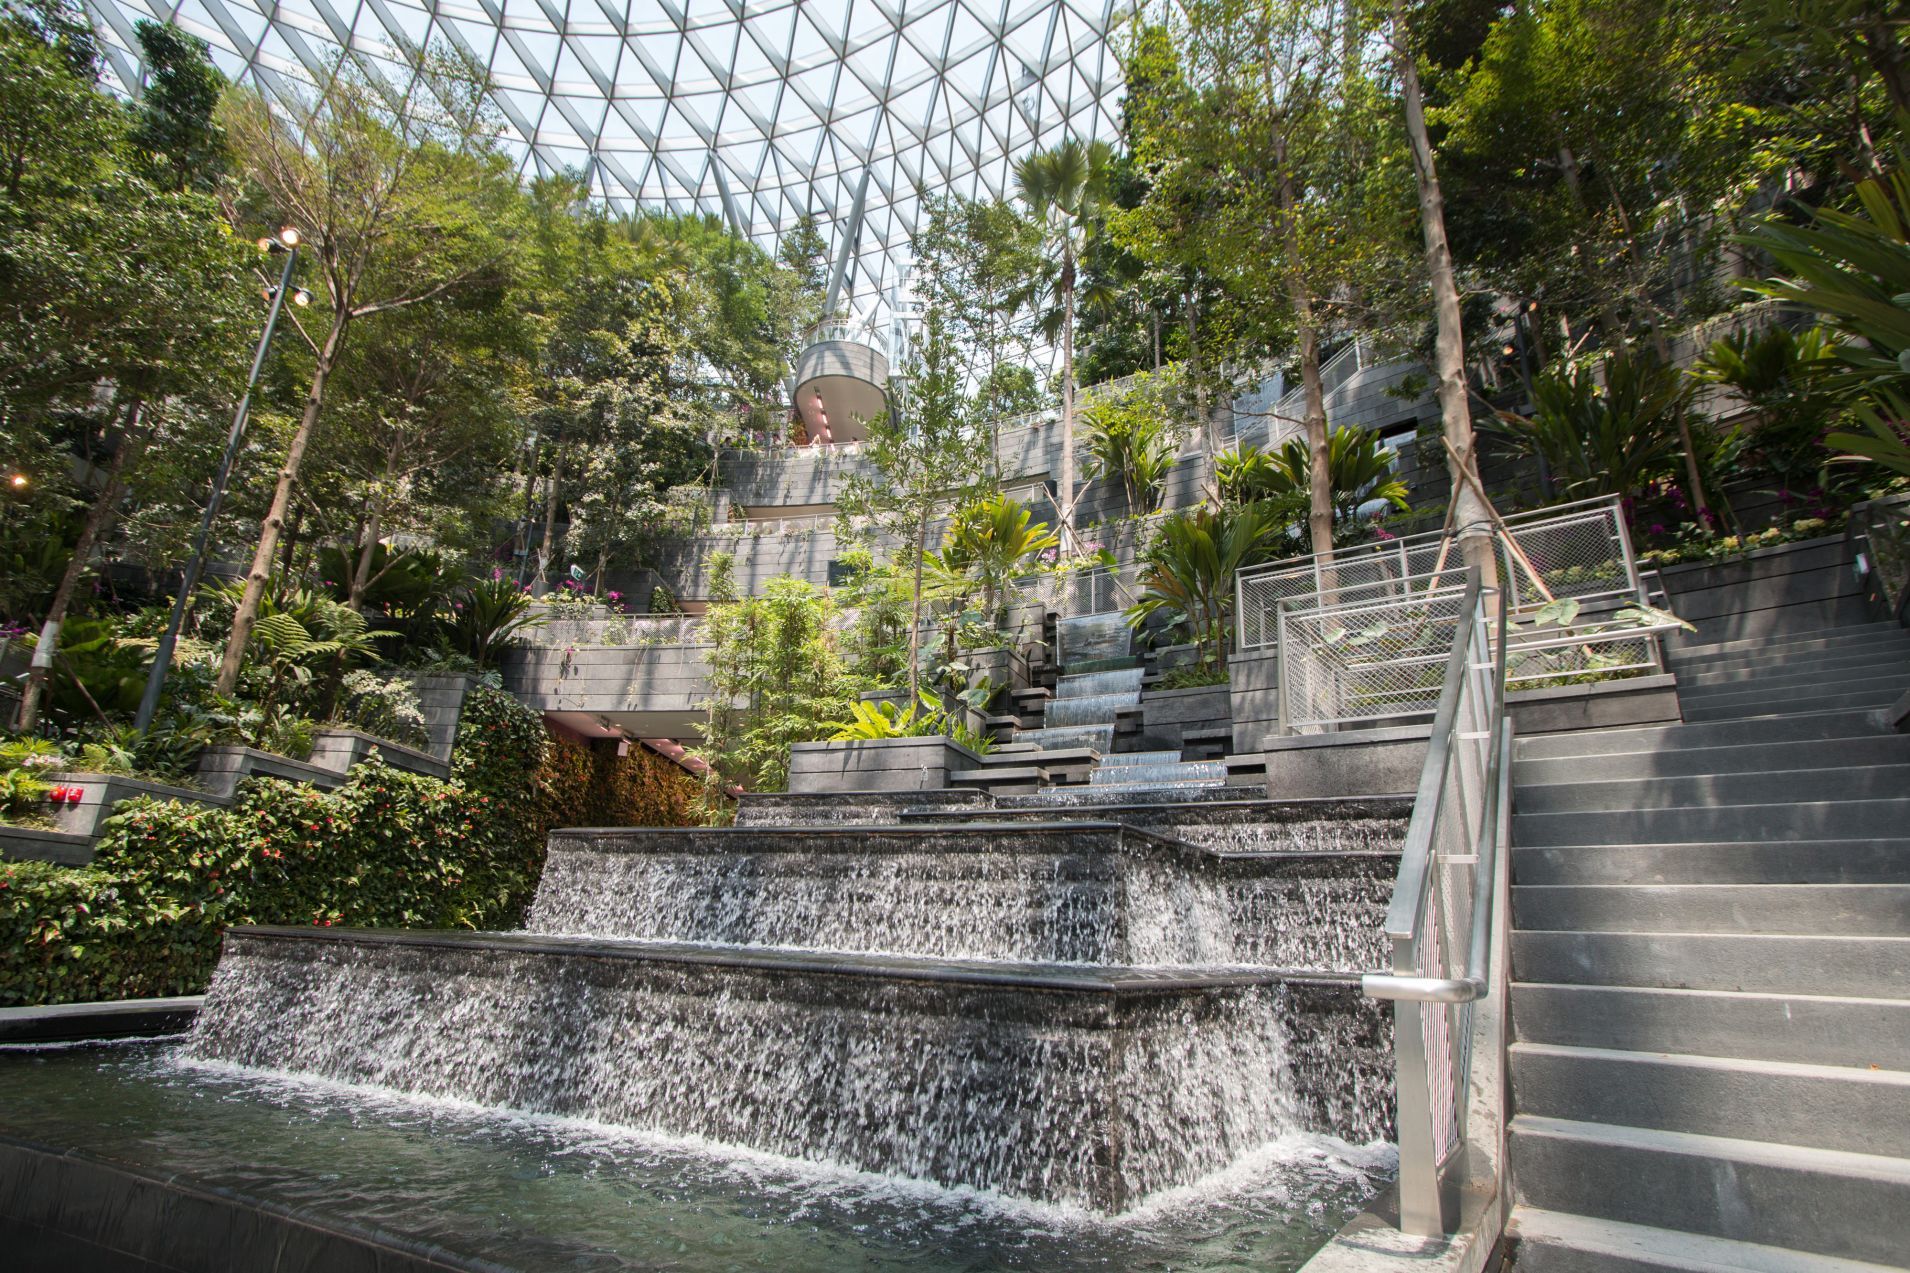  The Rain Vortex will pour rainwater down a seven-storey drop. The 40-metre-tall Rain Vortex – the world's tallest indoor waterfall – is the centrepiece of Singapore's soon-to-open Jewel Changi Airport, designed by Moshe Safdie's architecture firm. 